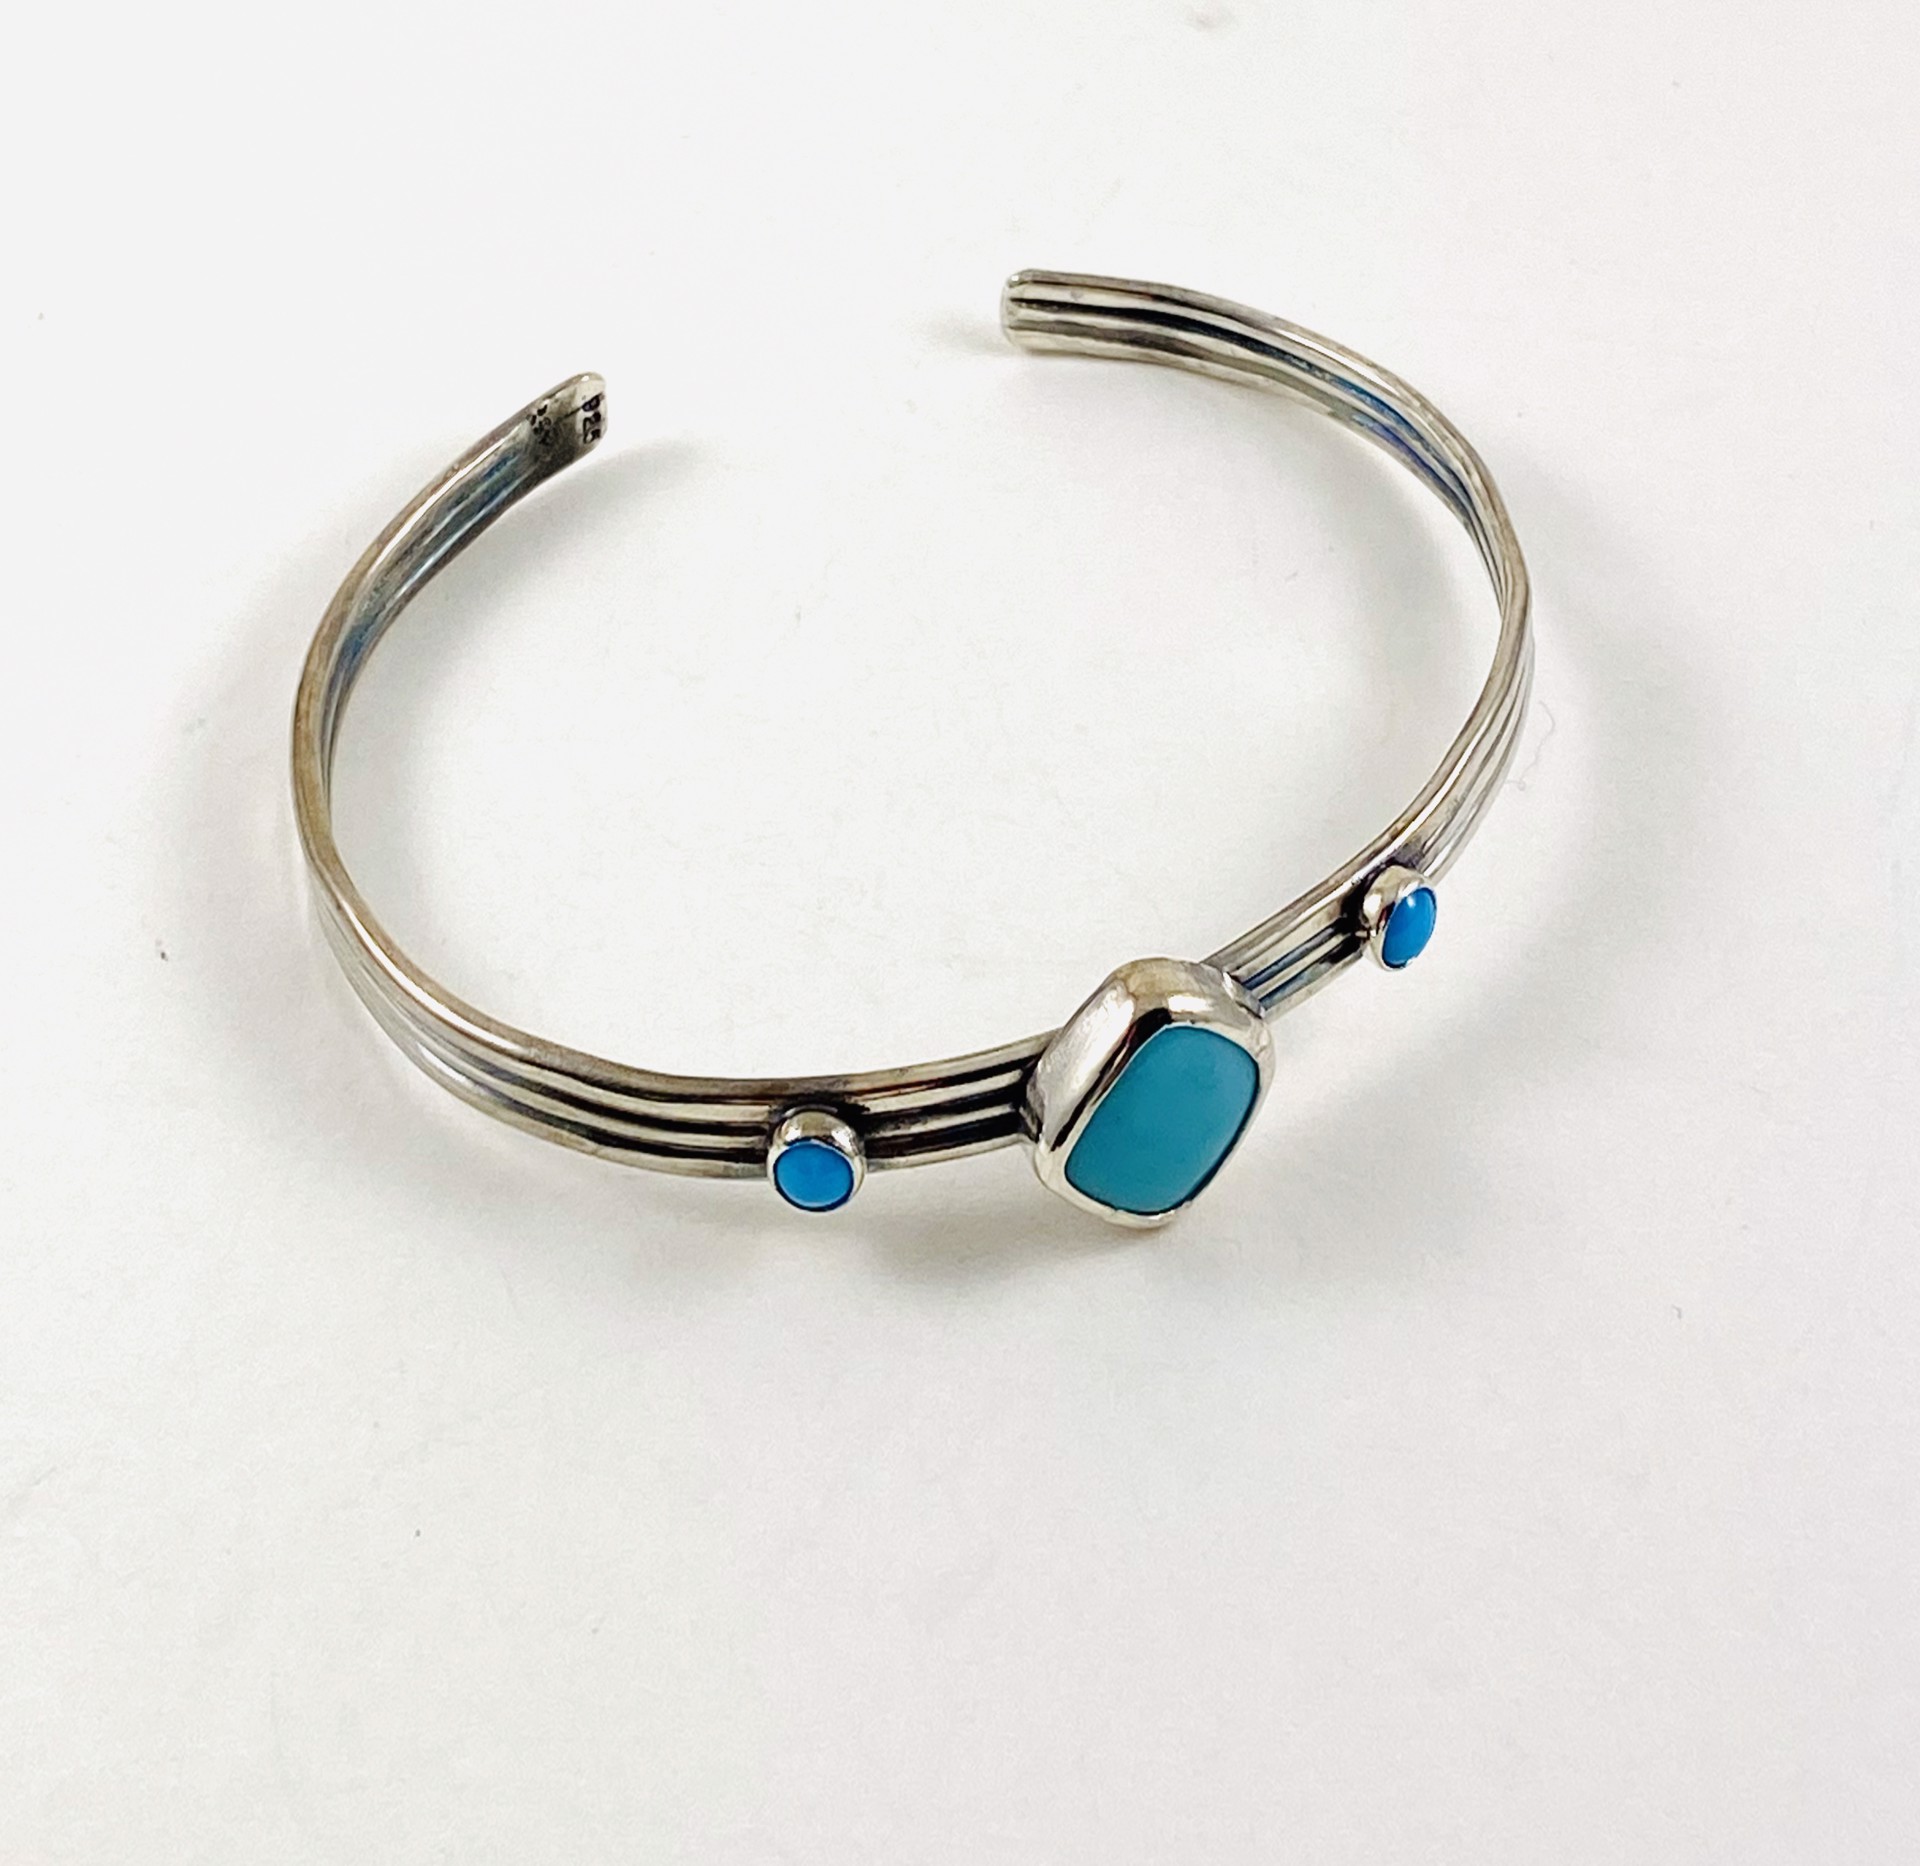 Silver, Campitos and Sleeping Beauty Turquoise Cuff Bracelet, #229 by Anne Bivens